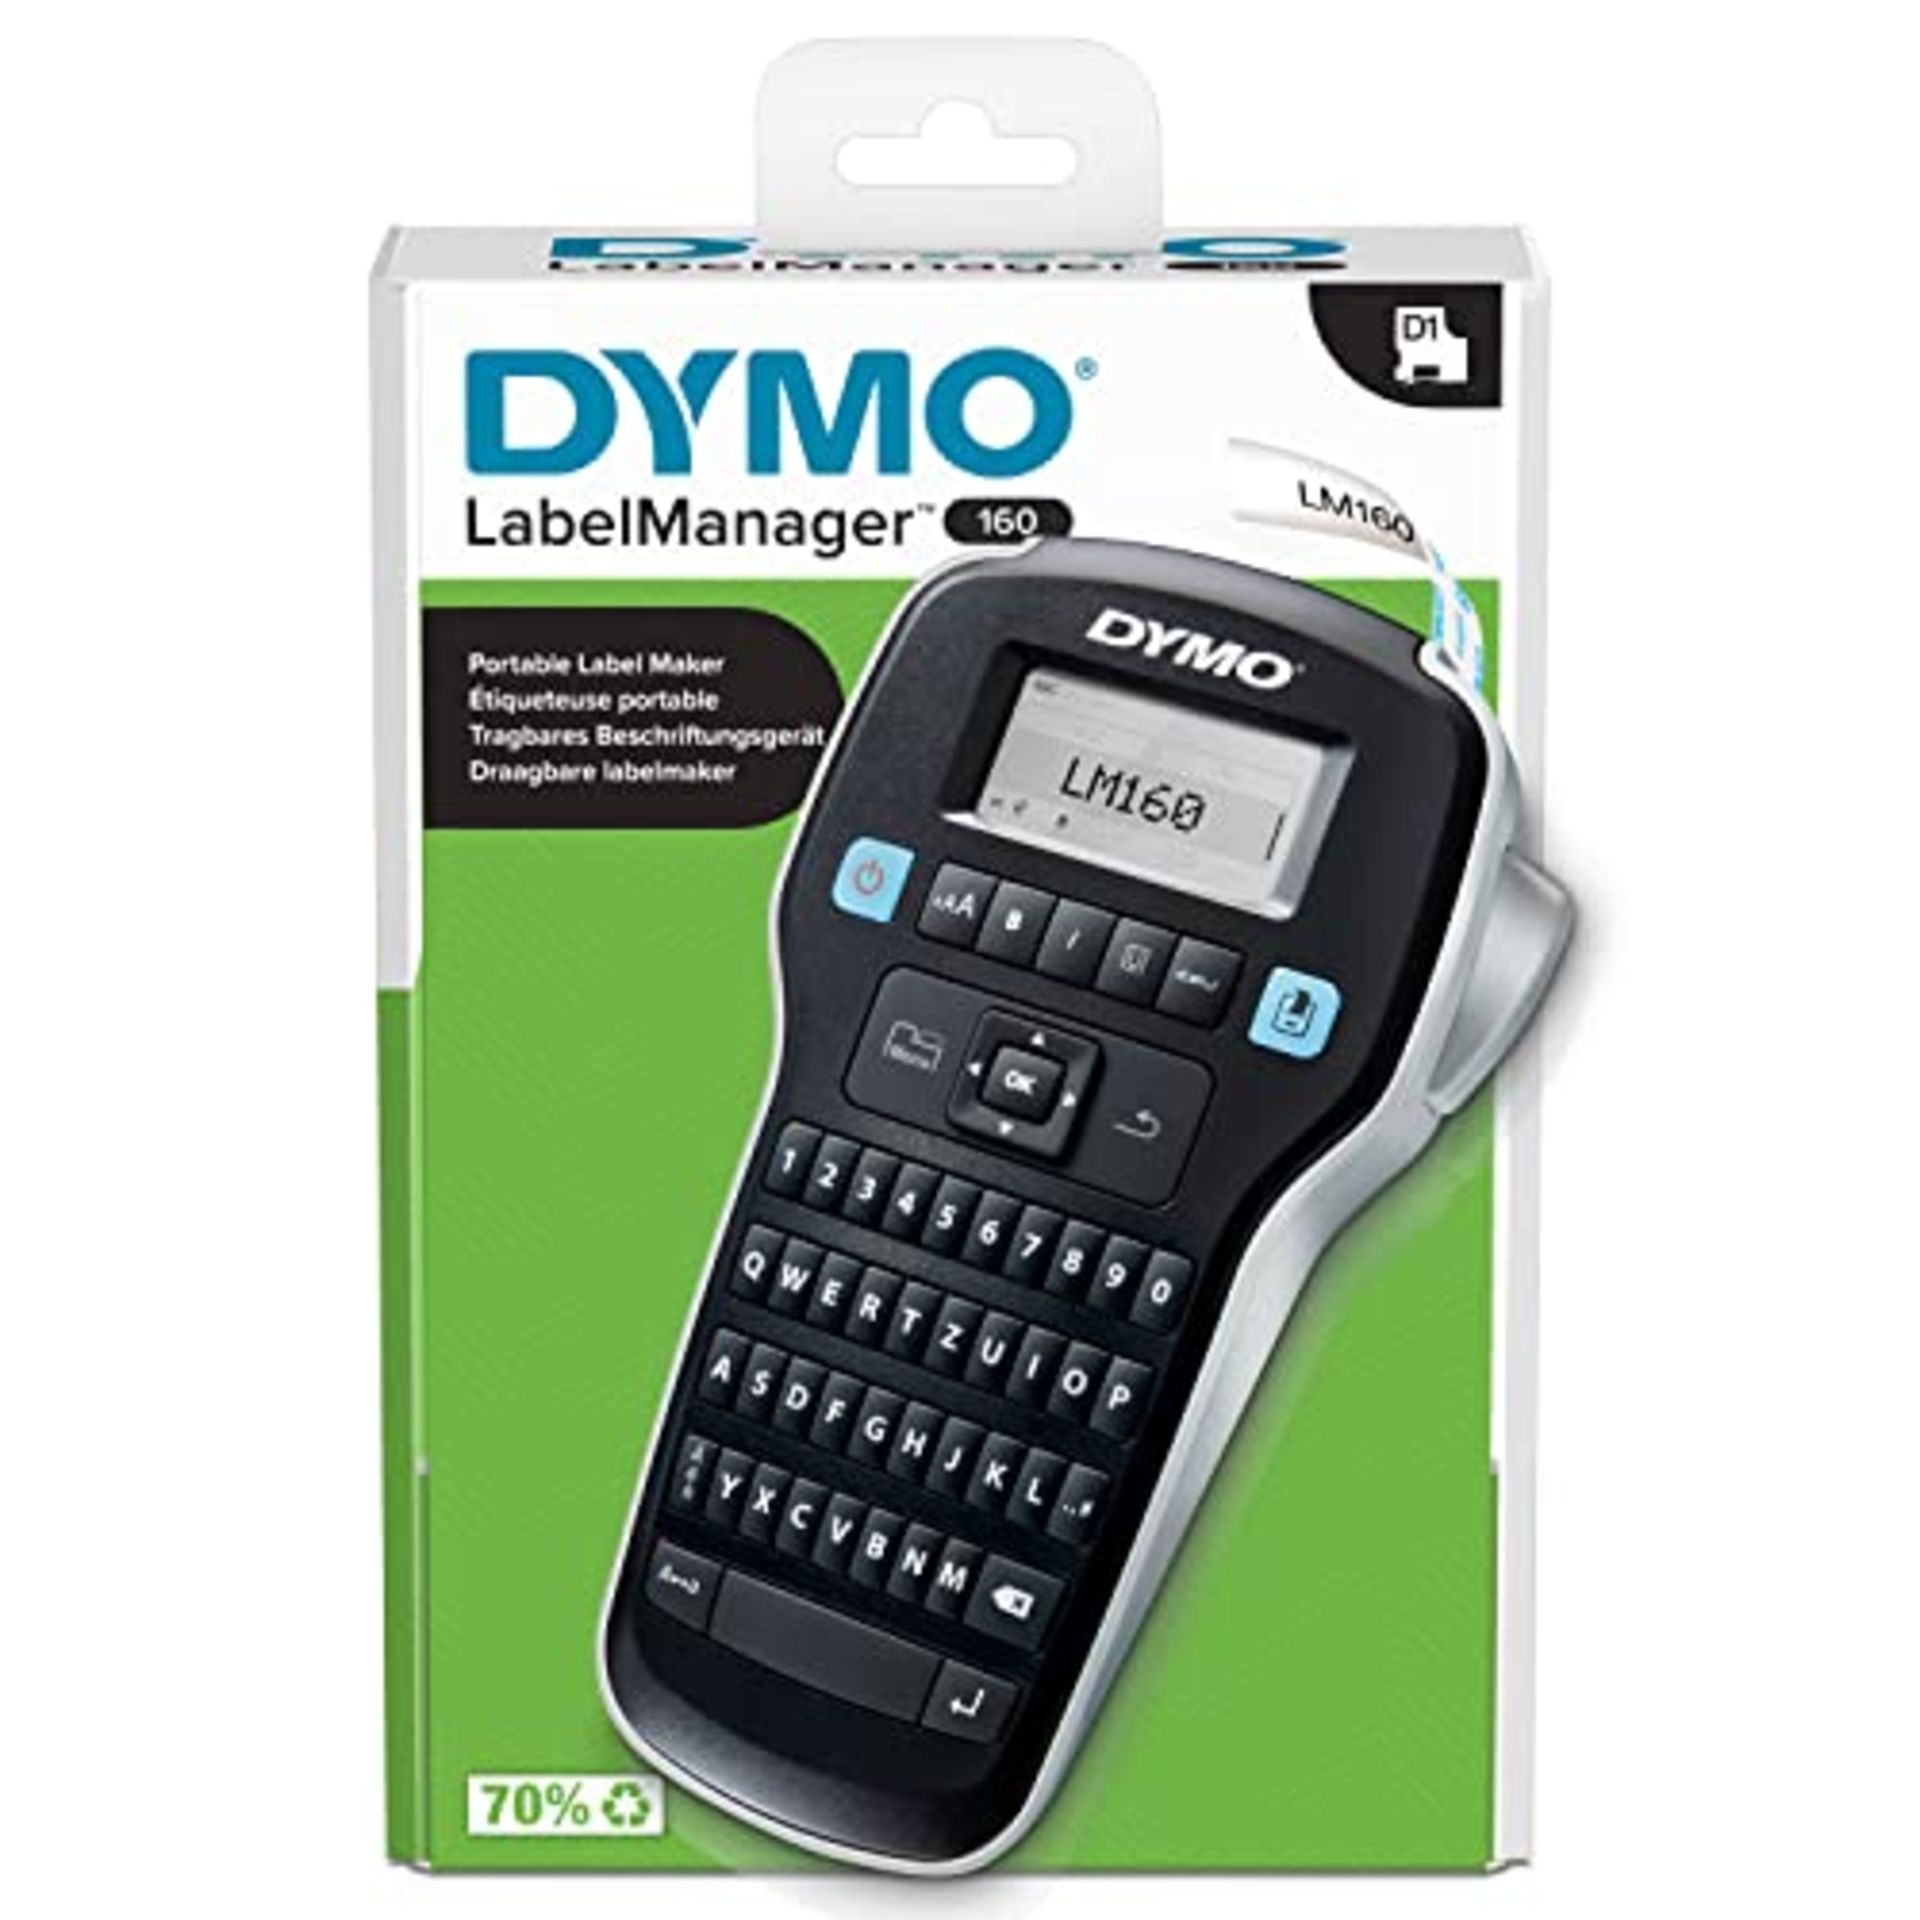 DYMO LabelManager 160 Portable Labeling Device | Labeling device with QWERTZ keyboard - Image 4 of 6